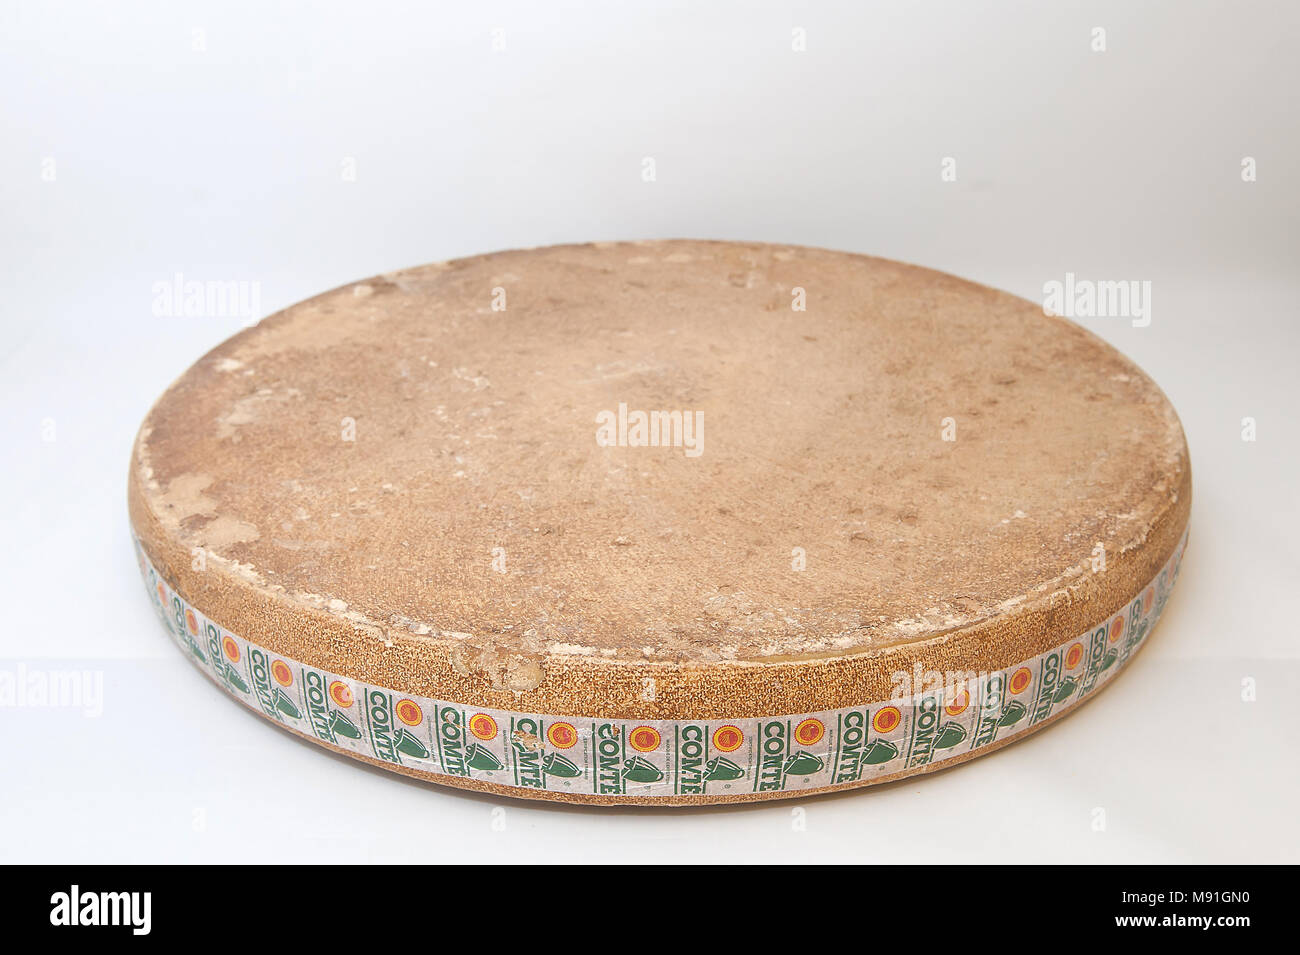 Comte french cheese Stock Photo